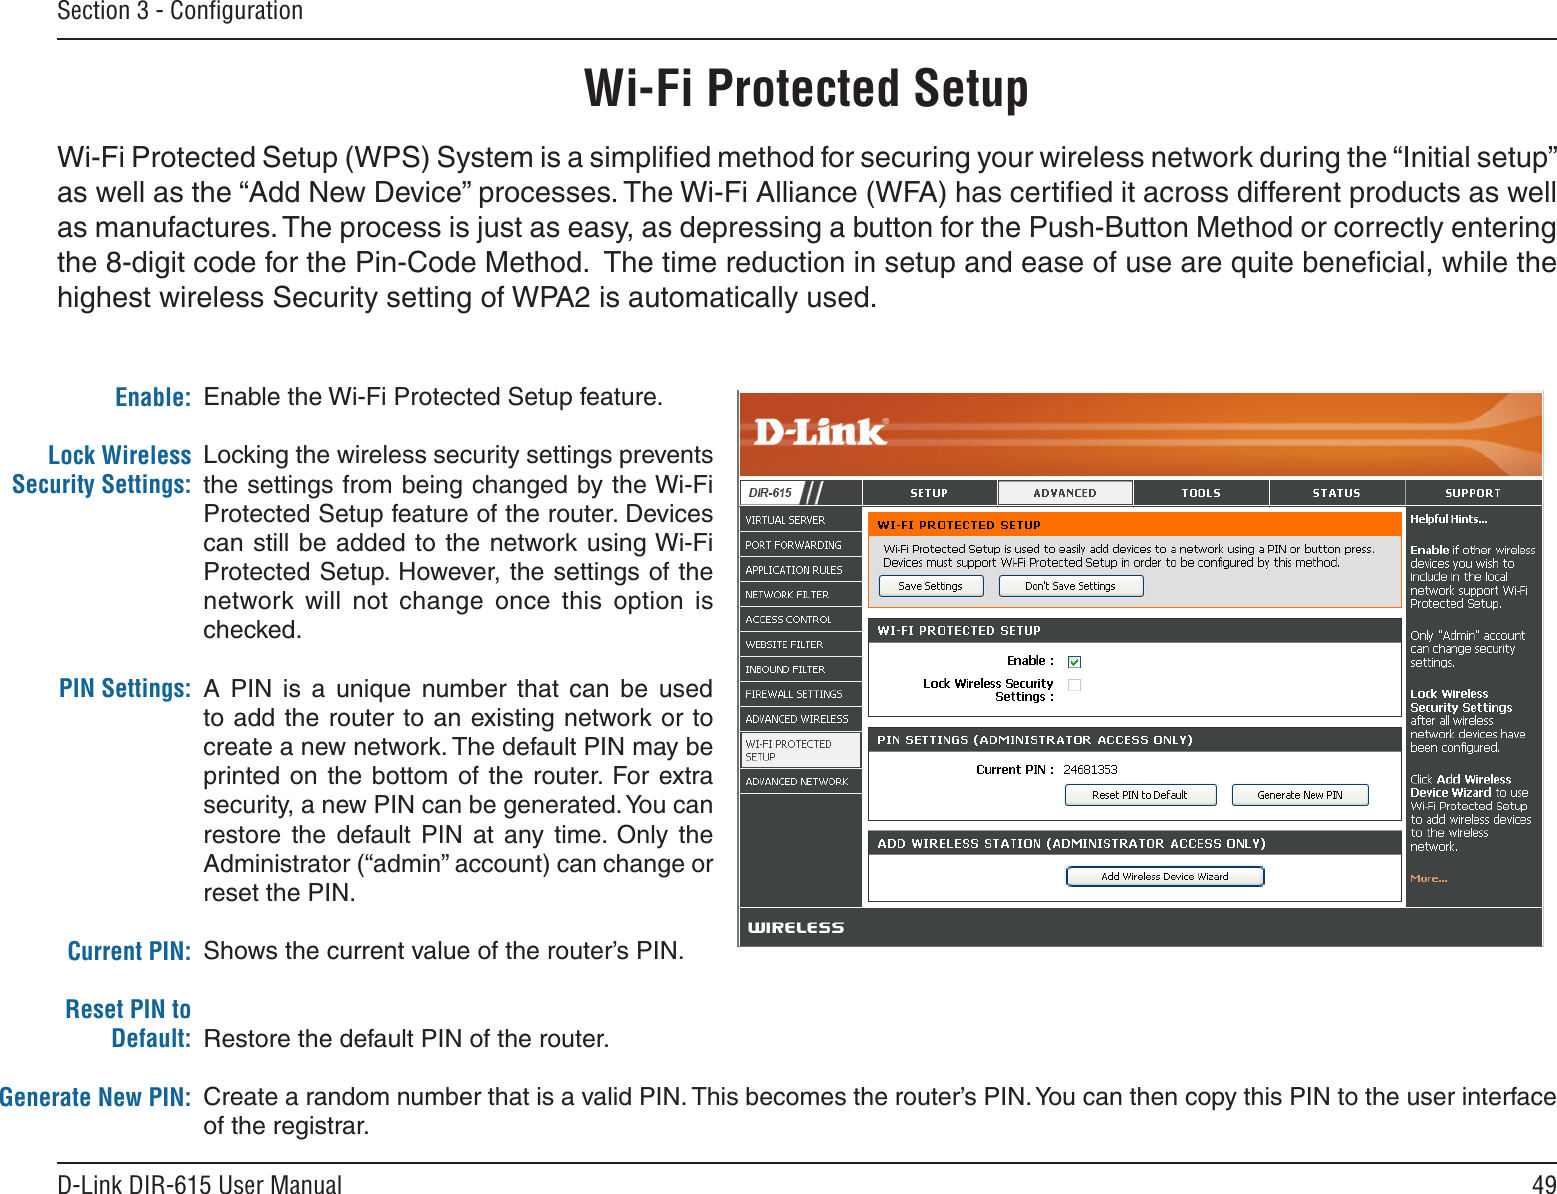 49D-Link DIR-615 User ManualSection 3 - ConﬁgurationEnable the Wi-Fi Protected Setup feature. Locking the wireless security settings prevents the settings from being changed by the Wi-Fi Protected Setup feature of the router. Devices can still be added to the network using Wi-Fi Protected Setup. However, the settings of the network  will  not  change  once  this  option  is checked.A  PIN  is  a  unique  number  that  can  be  used to add the router to an existing network or to create a new network. The default PIN may be printed  on the bottom  of the router. For extra security, a new PIN can be generated. You can restore  the  default  PIN  at  any  time.  Only  the Administrator (“admin” account) can change or reset the PIN. Shows the current value of the router’s PIN. Restore the default PIN of the router. Create a random number that is a valid PIN. This becomes the router’s PIN. You can then copy this PIN to the user interface of the registrar. Enable:Lock Wireless Security Settings:PIN Settings:Current PIN:Reset PIN to Default:Generate New PIN:Wi-Fi Protected SetupWi-Fi Protected Setup (WPS) System is a simpliﬁed method for securing your wireless network during the “Initial setup” as well as the “Add New Device” processes. The Wi-Fi Alliance (WFA) has certiﬁed it across different products as well as manufactures. The process is just as easy, as depressing a button for the Push-Button Method or correctly entering the 8-digit code for the Pin-Code Method.  The time reduction in setup and ease of use are quite beneﬁcial, while the highest wireless Security setting of WPA2 is automatically used.